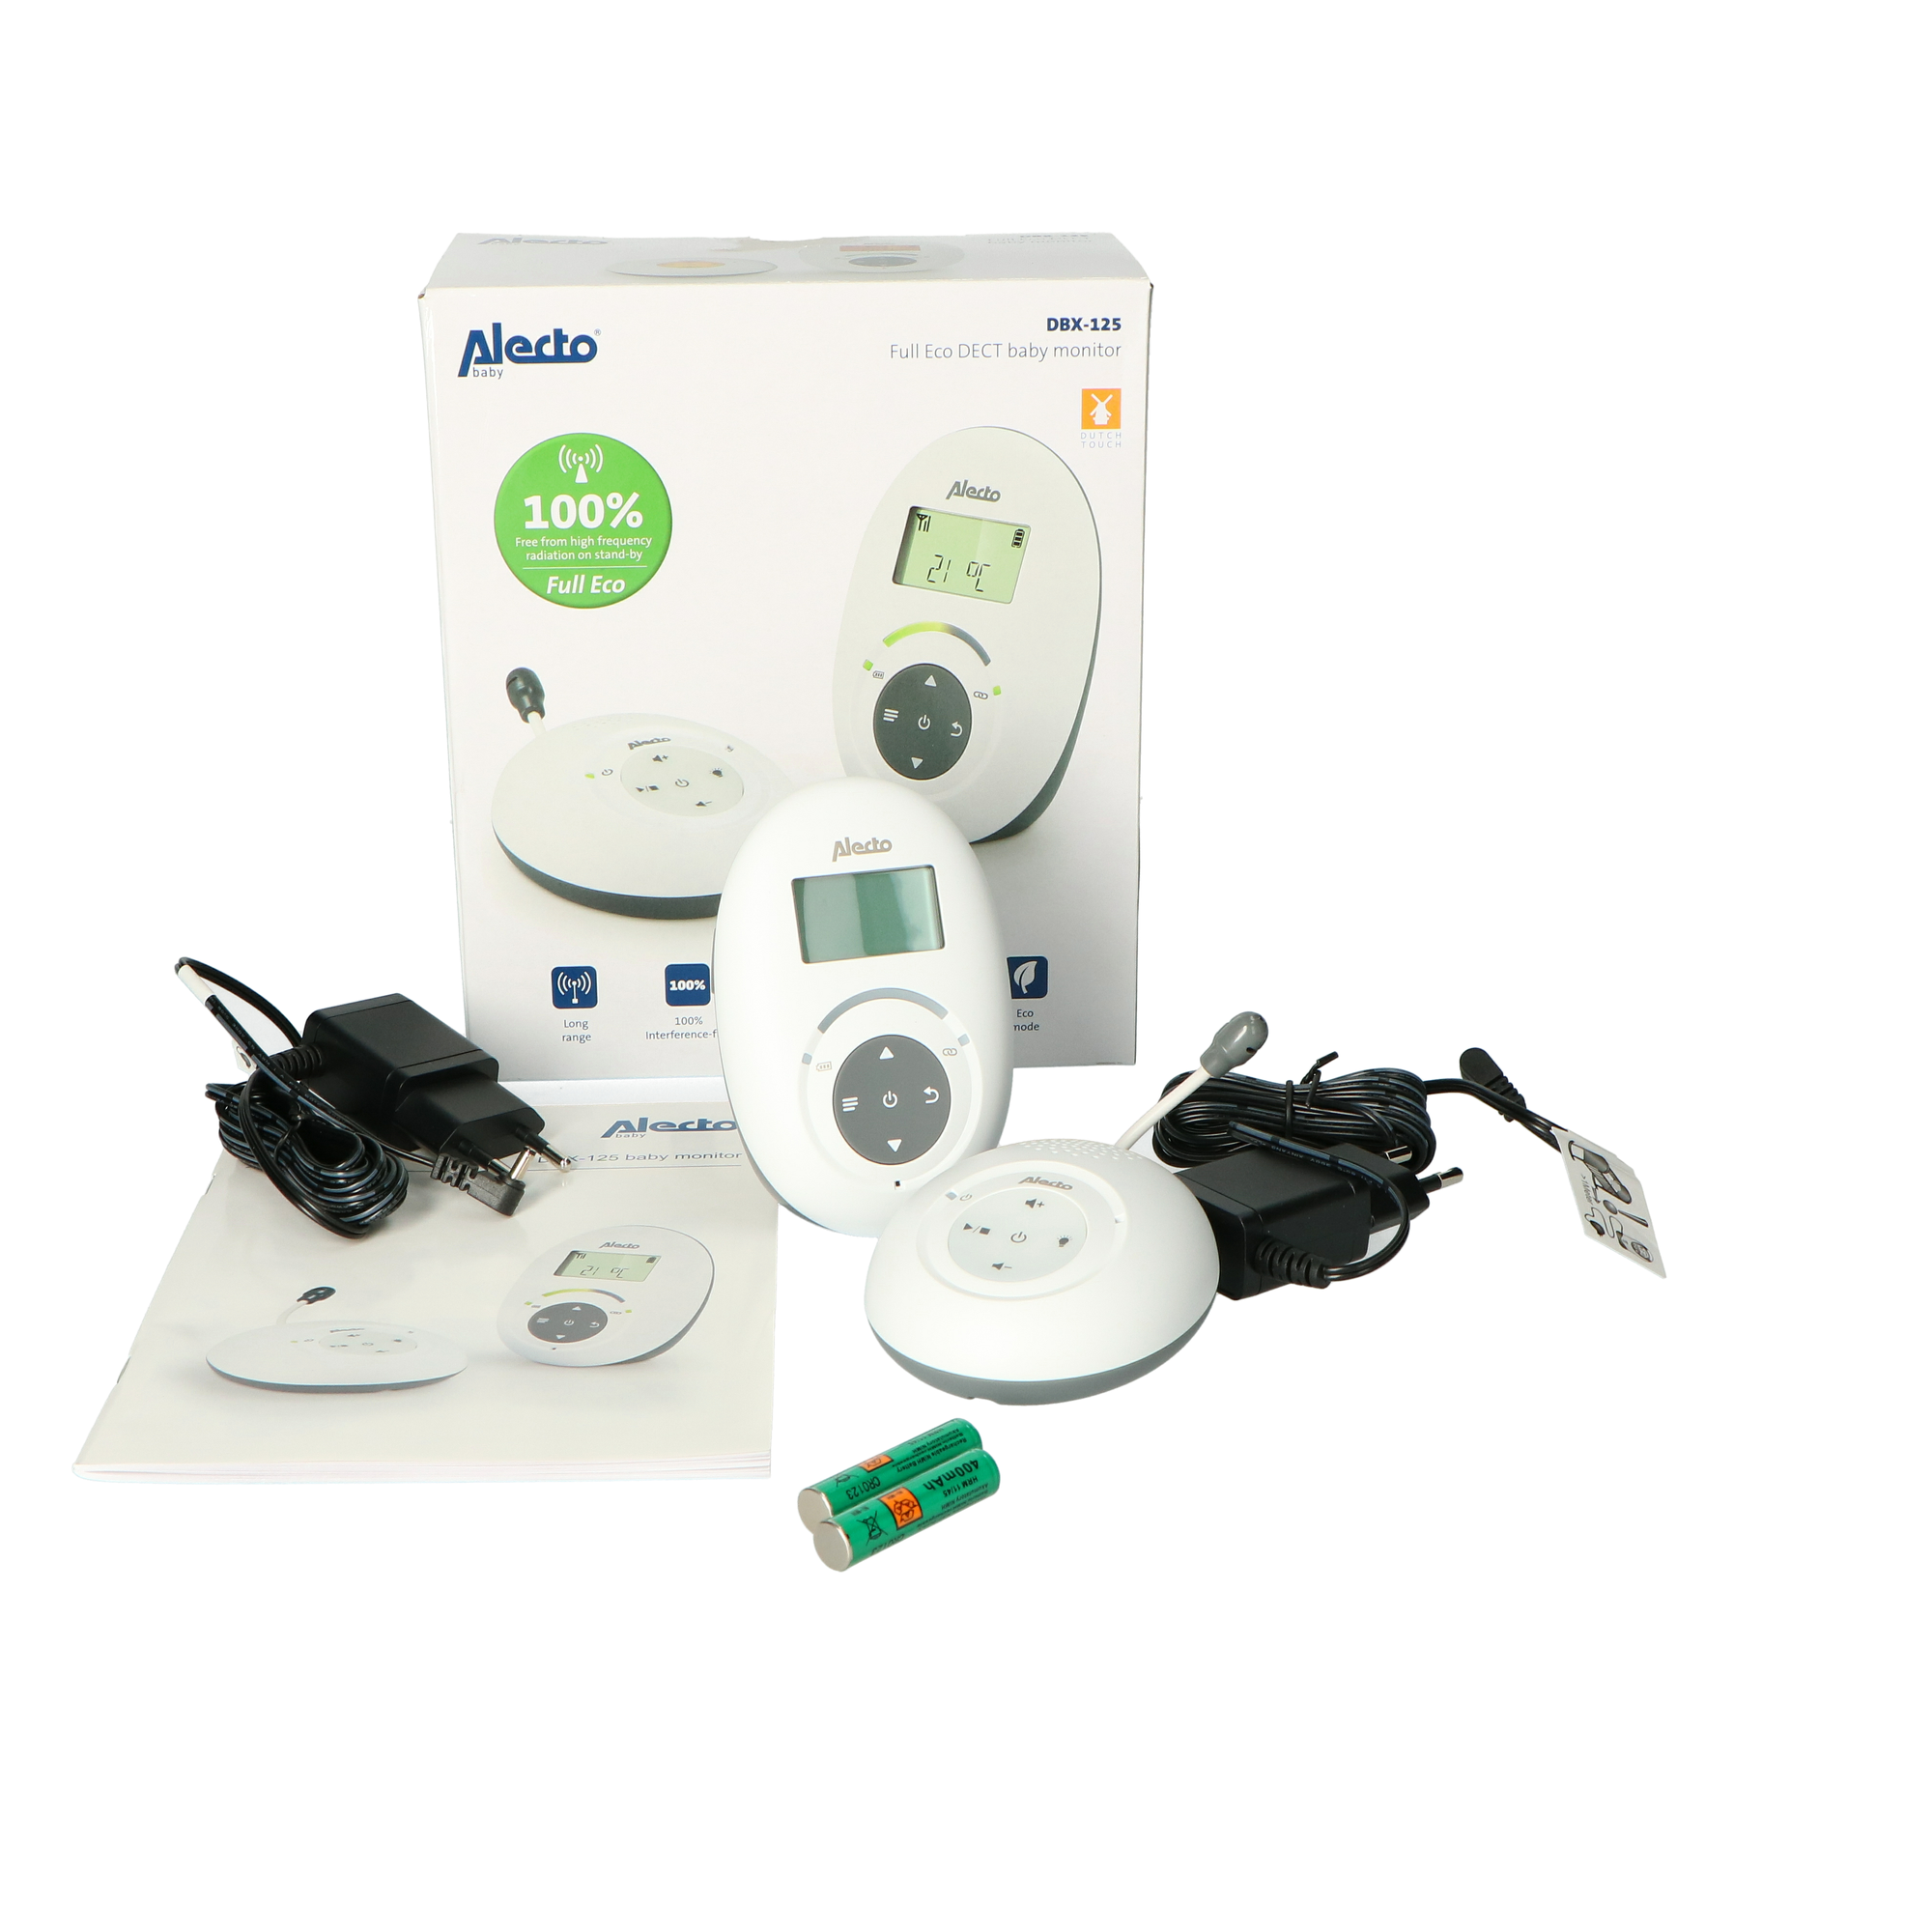 ALECTO - Full Eco DECT - DBX-125 Babyphone